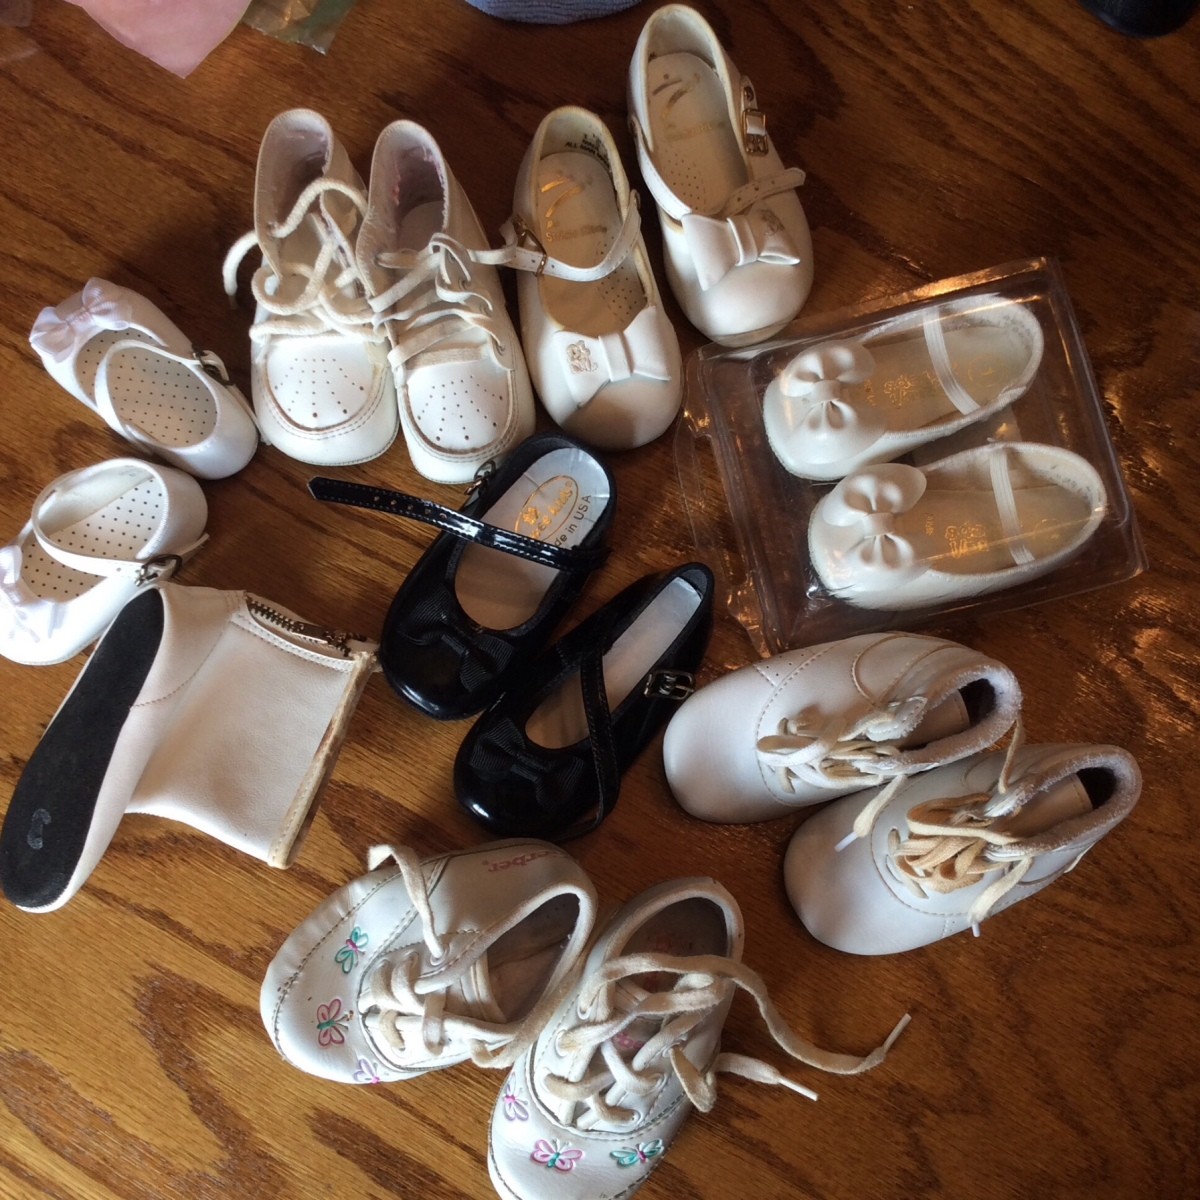 Cleaning and Deodorizing Vintage Baby Shoes? | ThriftyFun